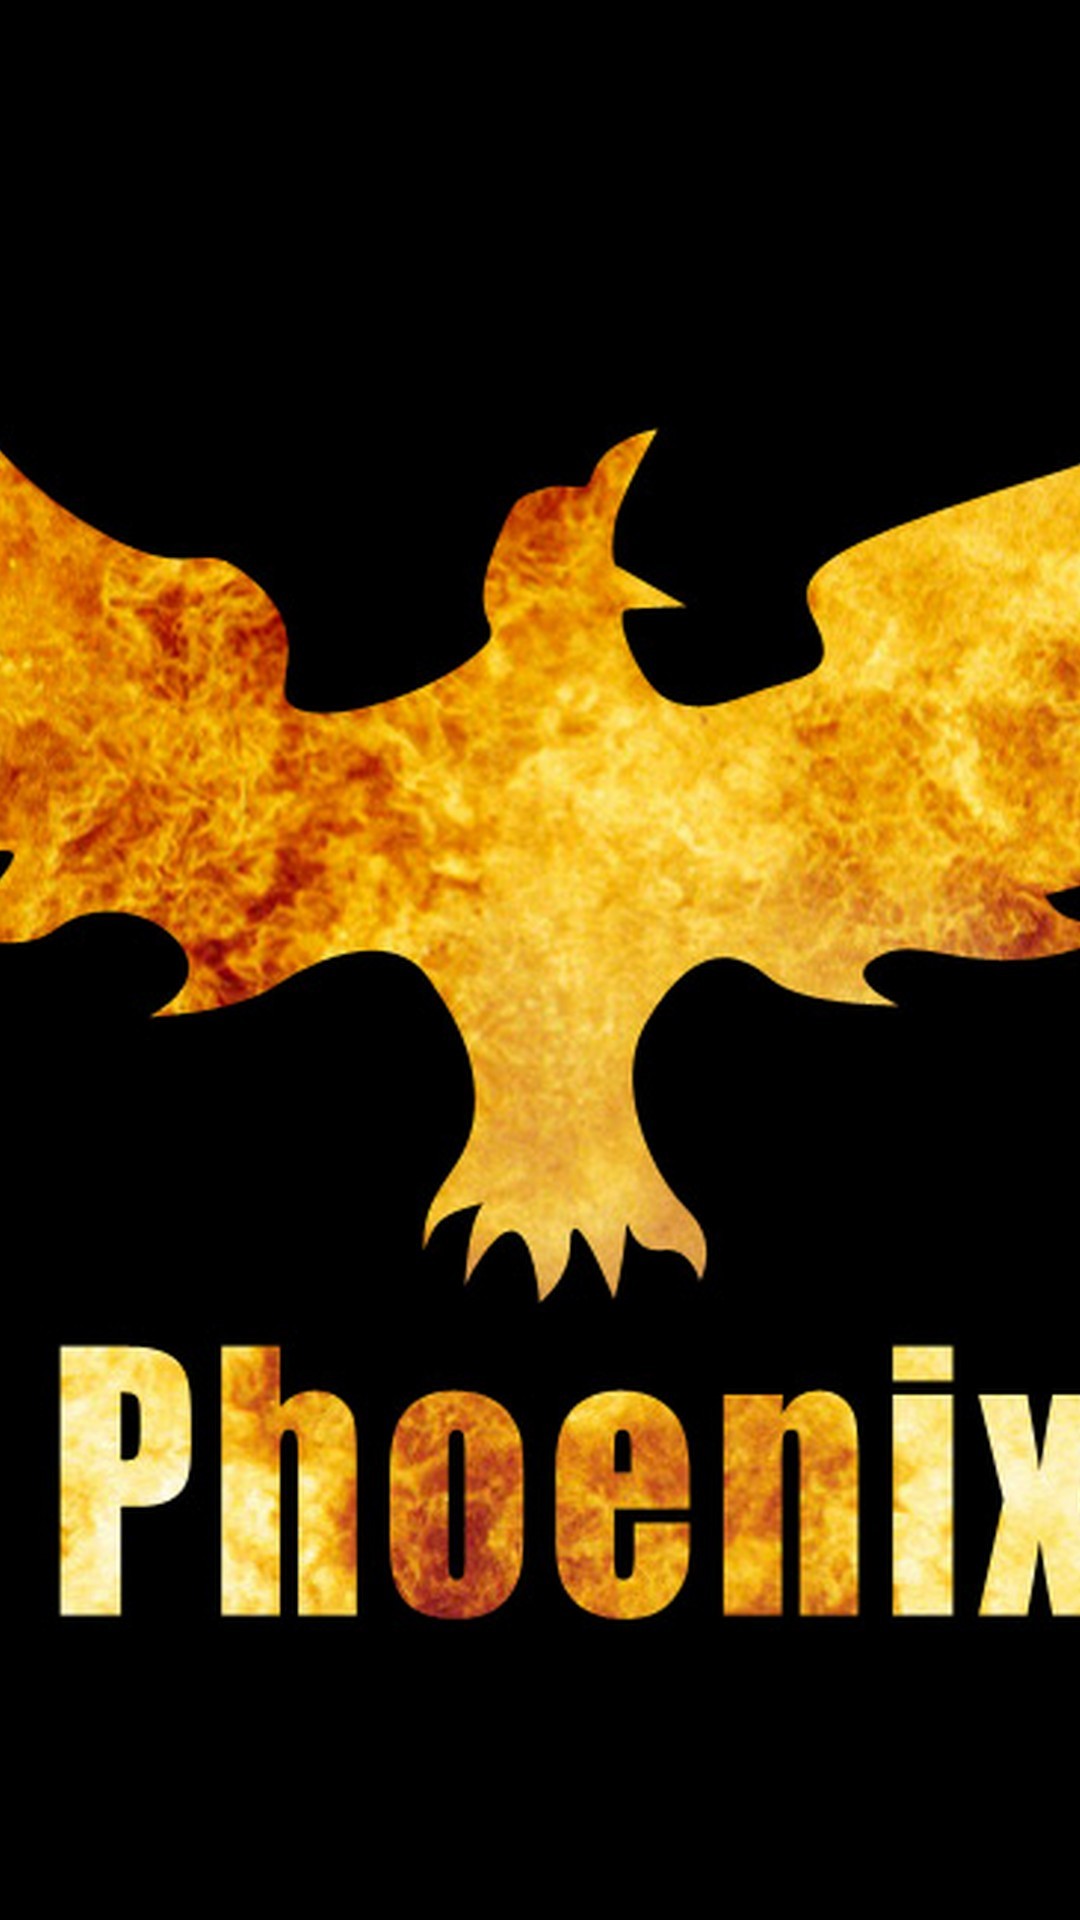 Android Wallpaper HD Phoenix Images with image resolution 1080x1920 pixel. You can make this wallpaper for your Android backgrounds, Tablet, Smartphones Screensavers and Mobile Phone Lock Screen